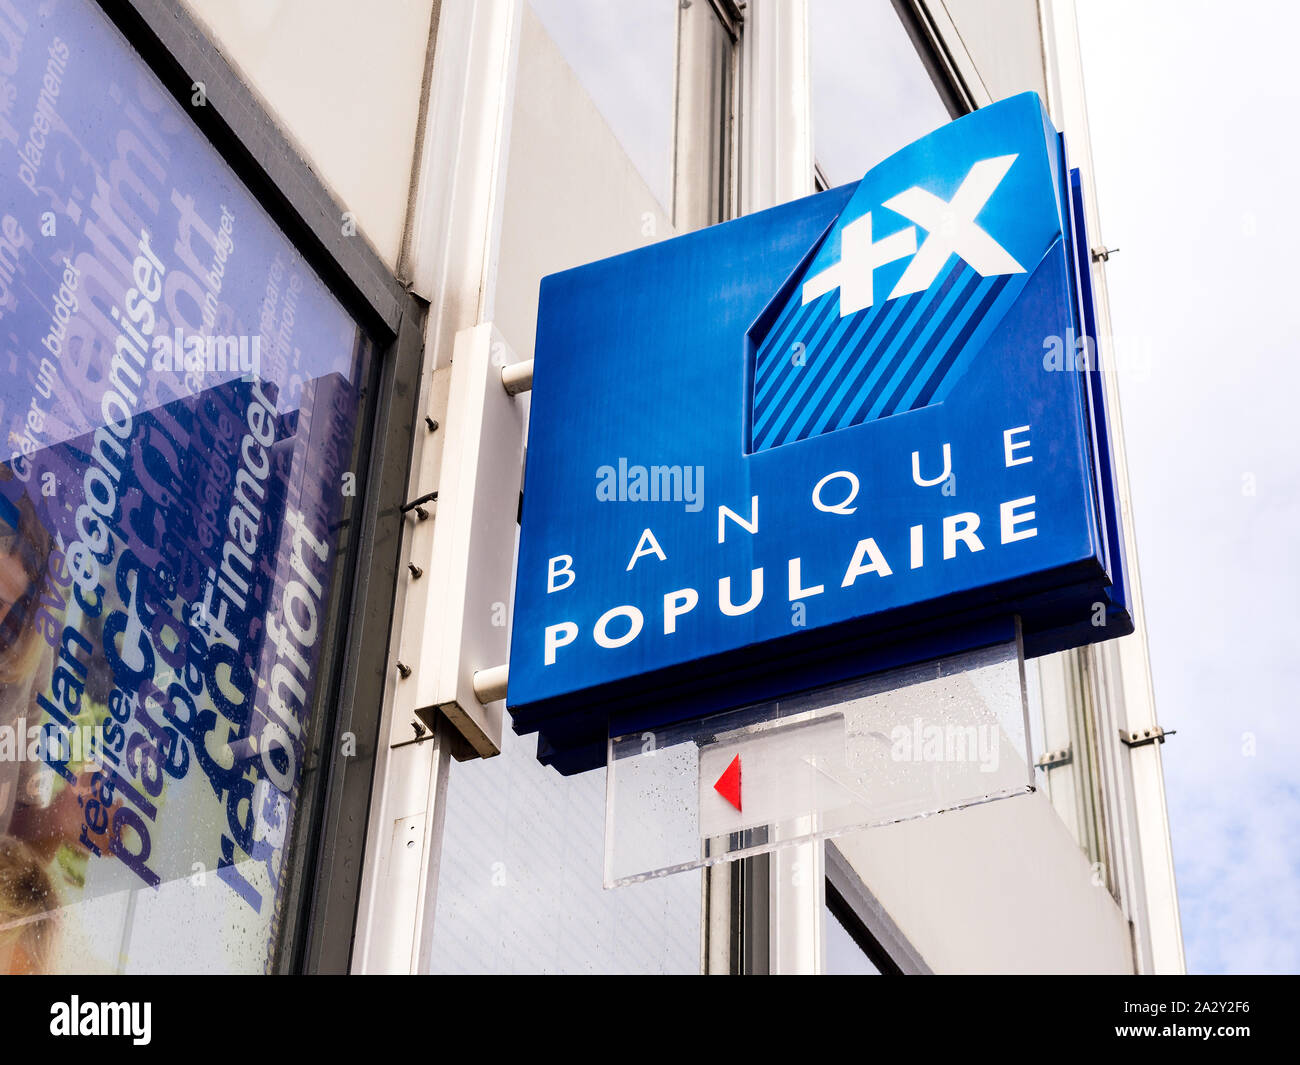 'Banque Populaire' sign - France. Stock Photo